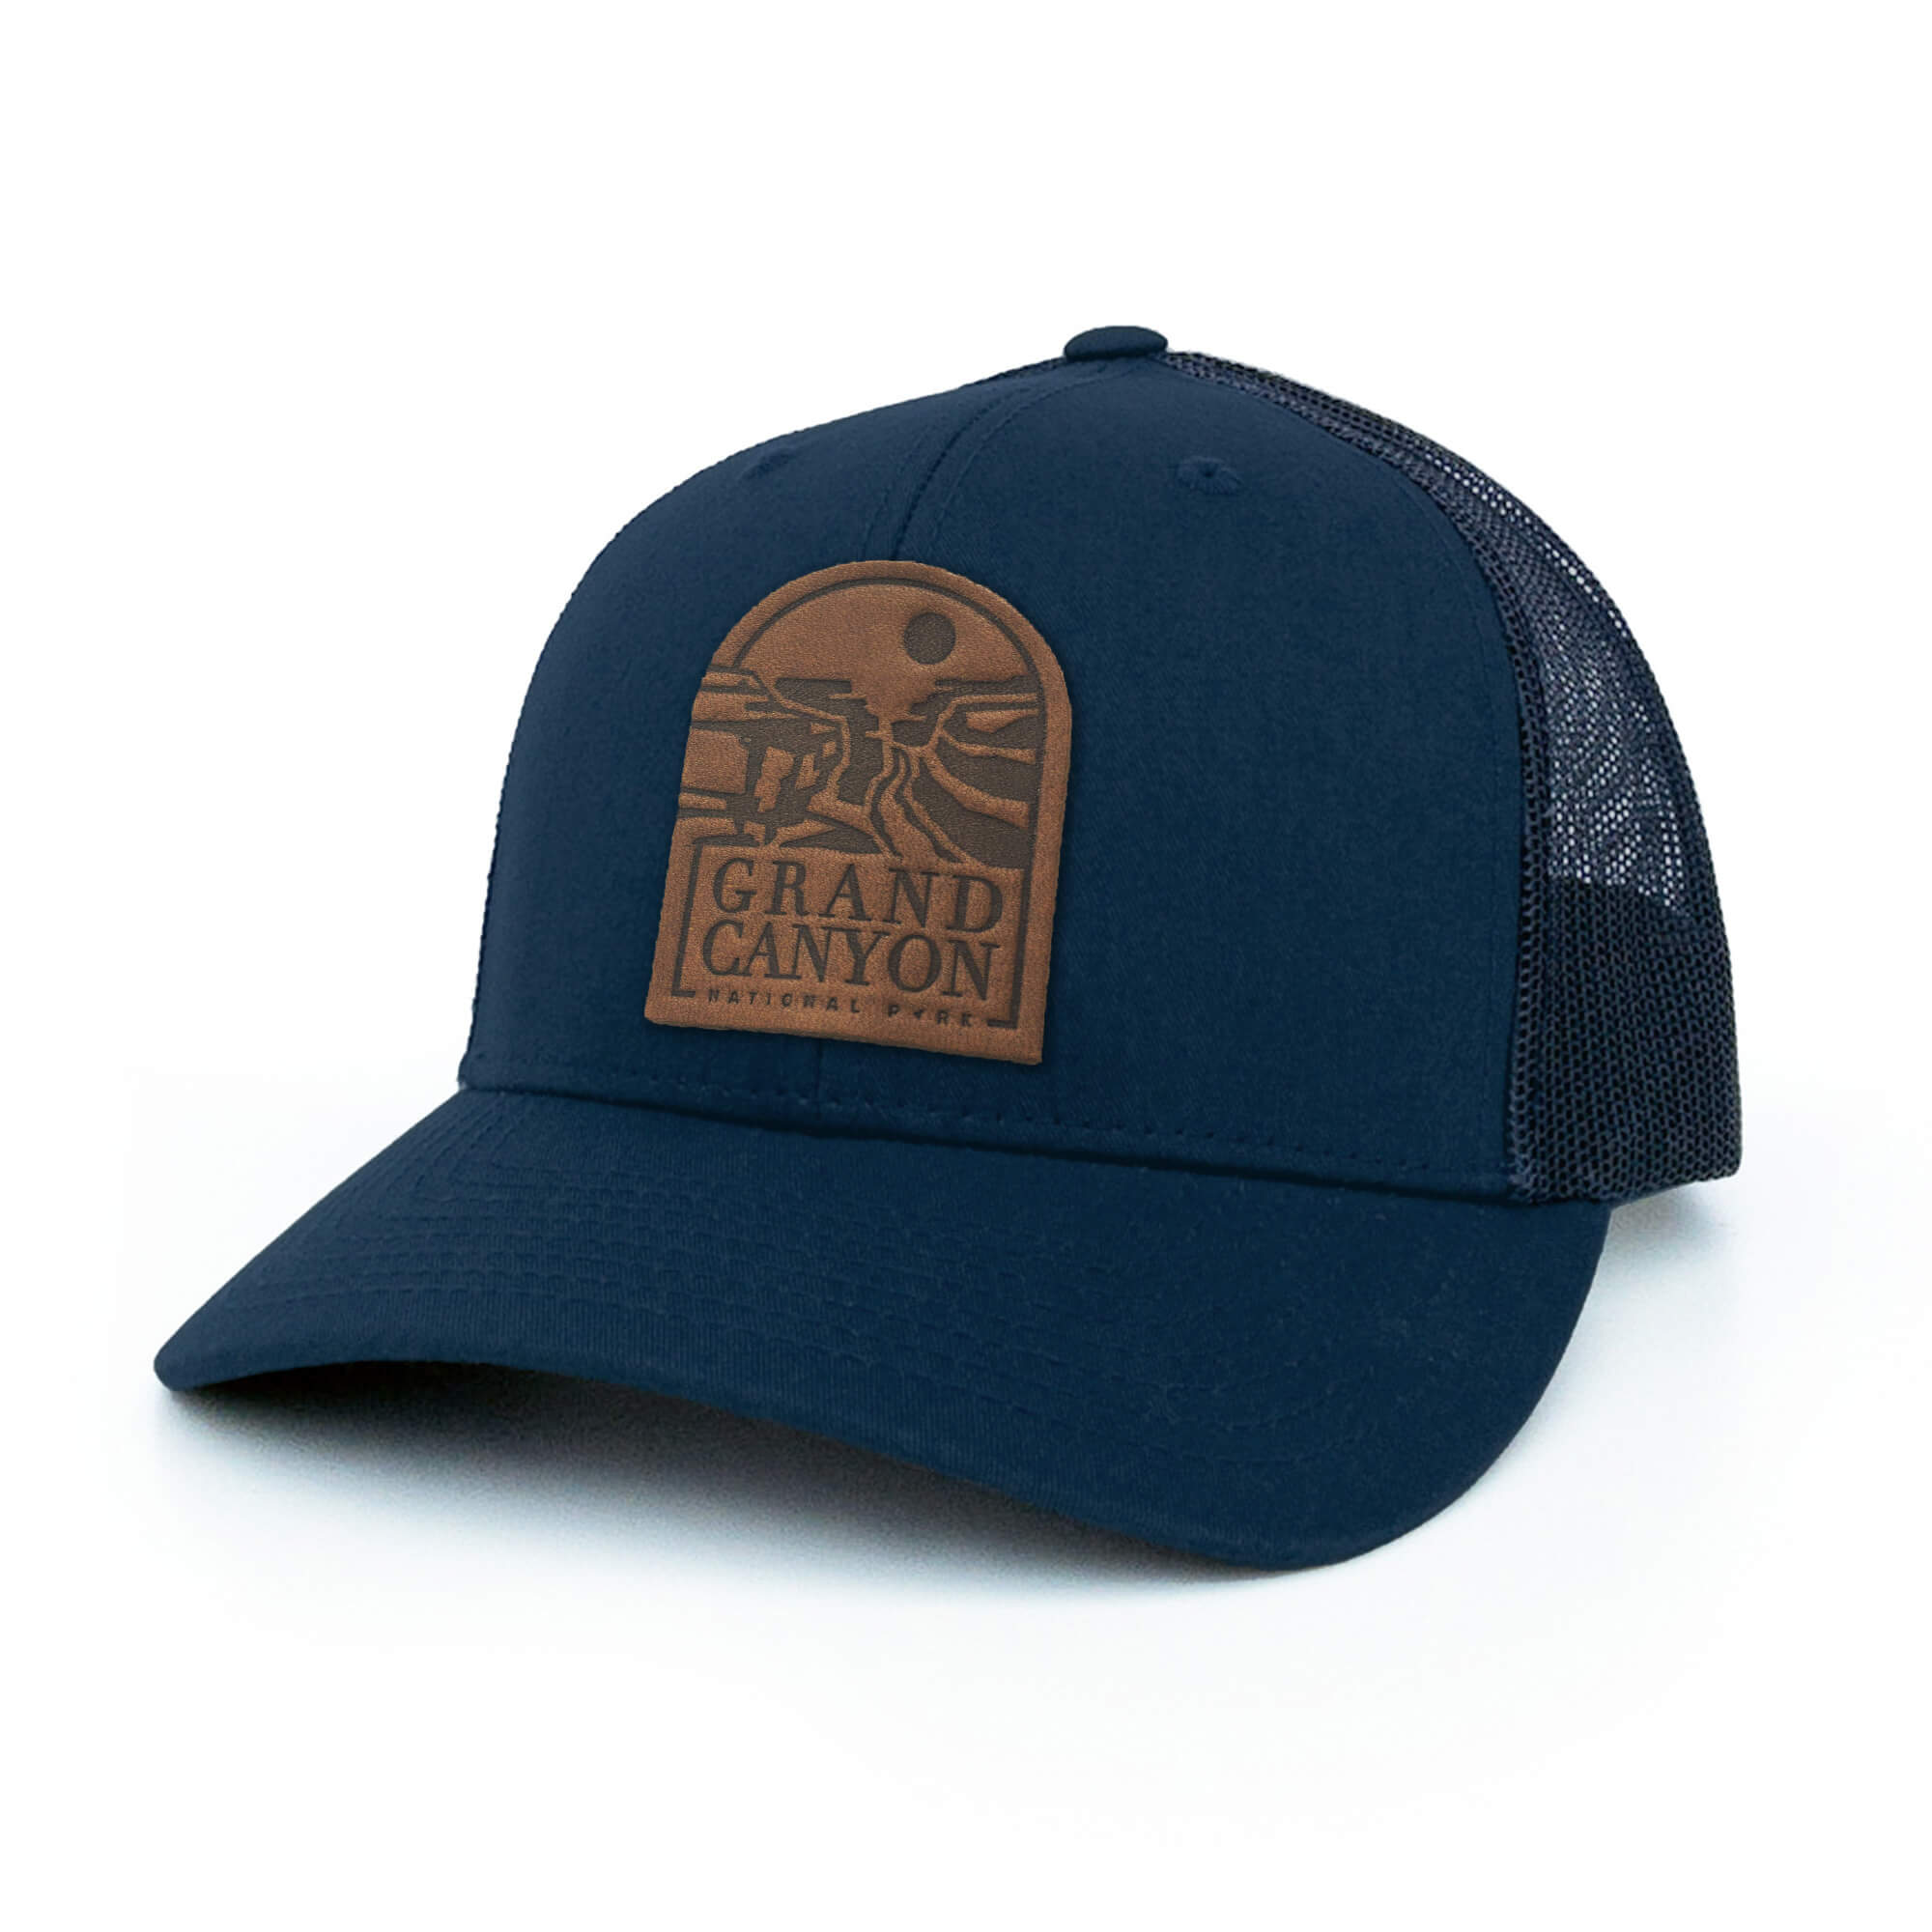 Navy trucker hat with full-grain leather patch of Grand Canyon National Park | BLACK-007-004, CHARC-007-004, NAVY-007-004, HGREY-007-004, MOSS-007-004, BROWN-007-004